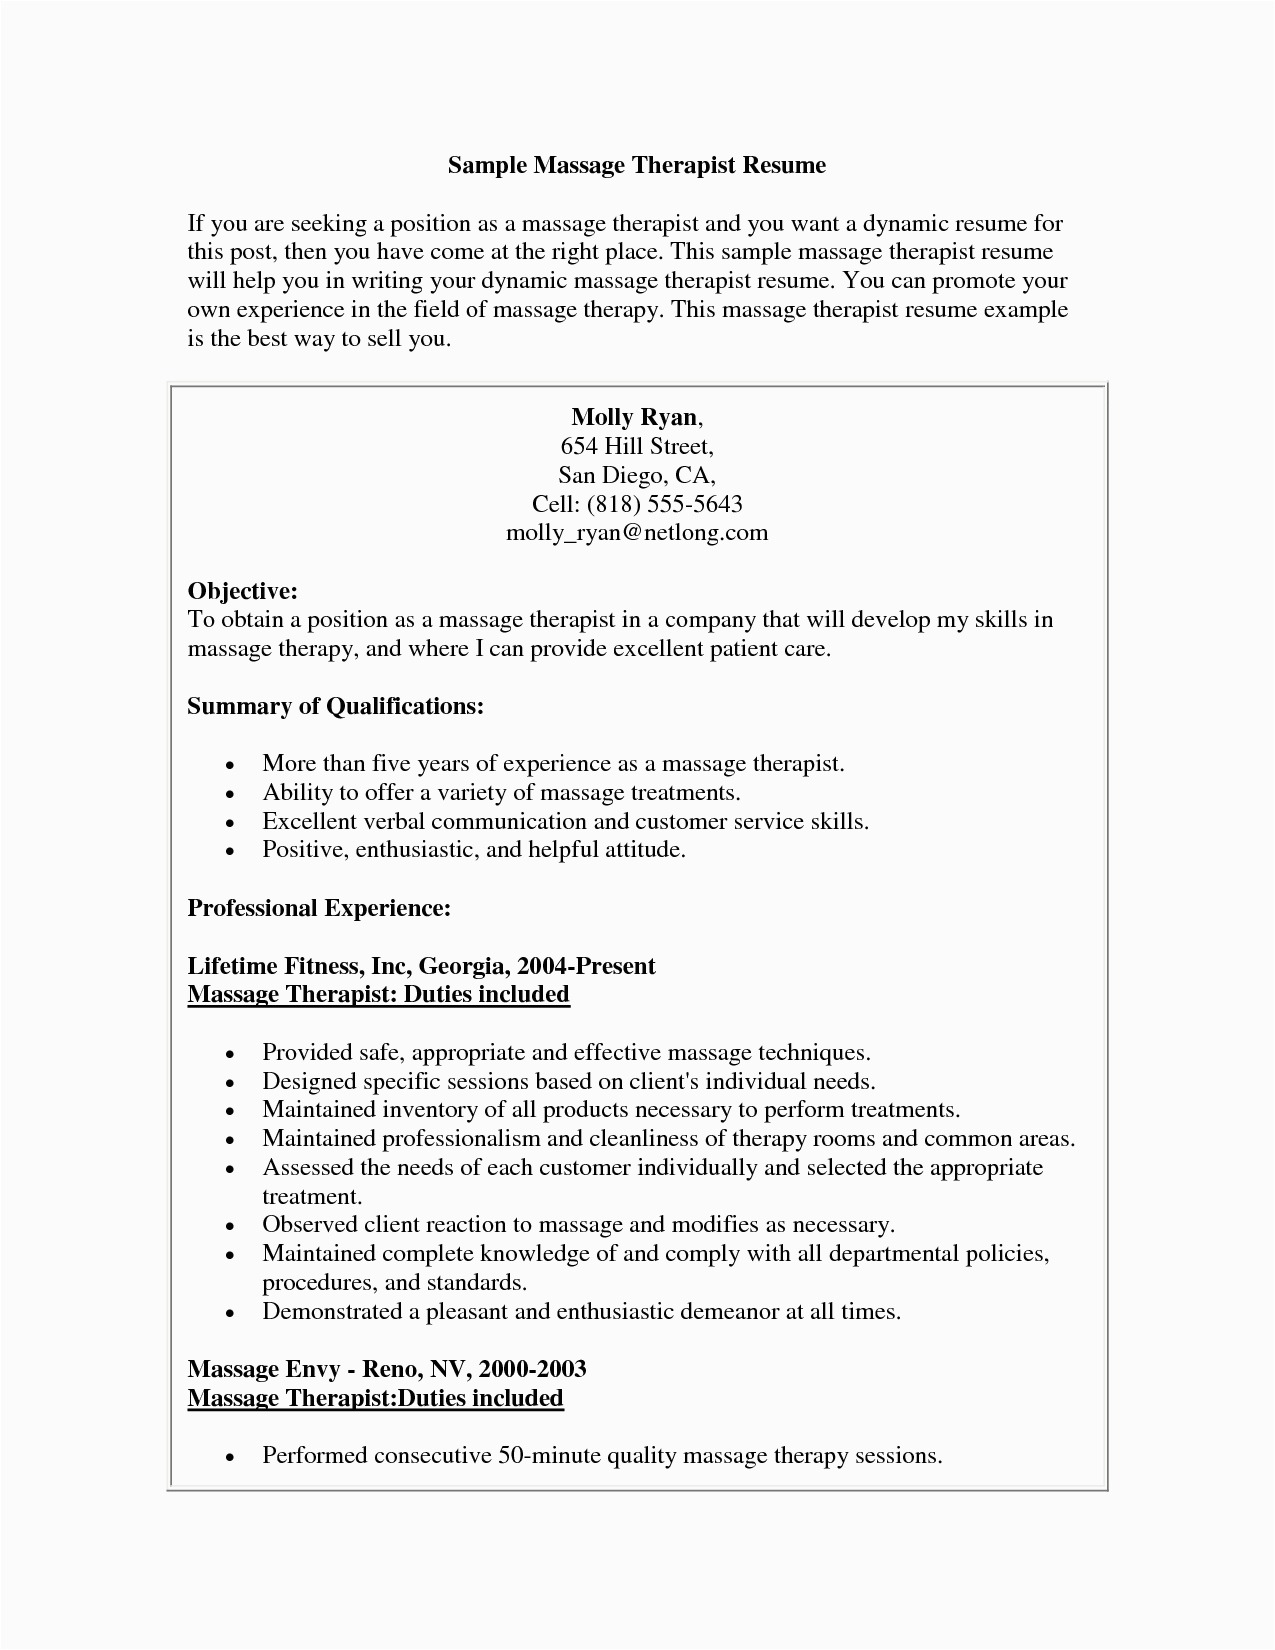 Sample Functional Resume for Massage therapist 😂 Massage therapist Cv Massage therapist Resume Samples Examples